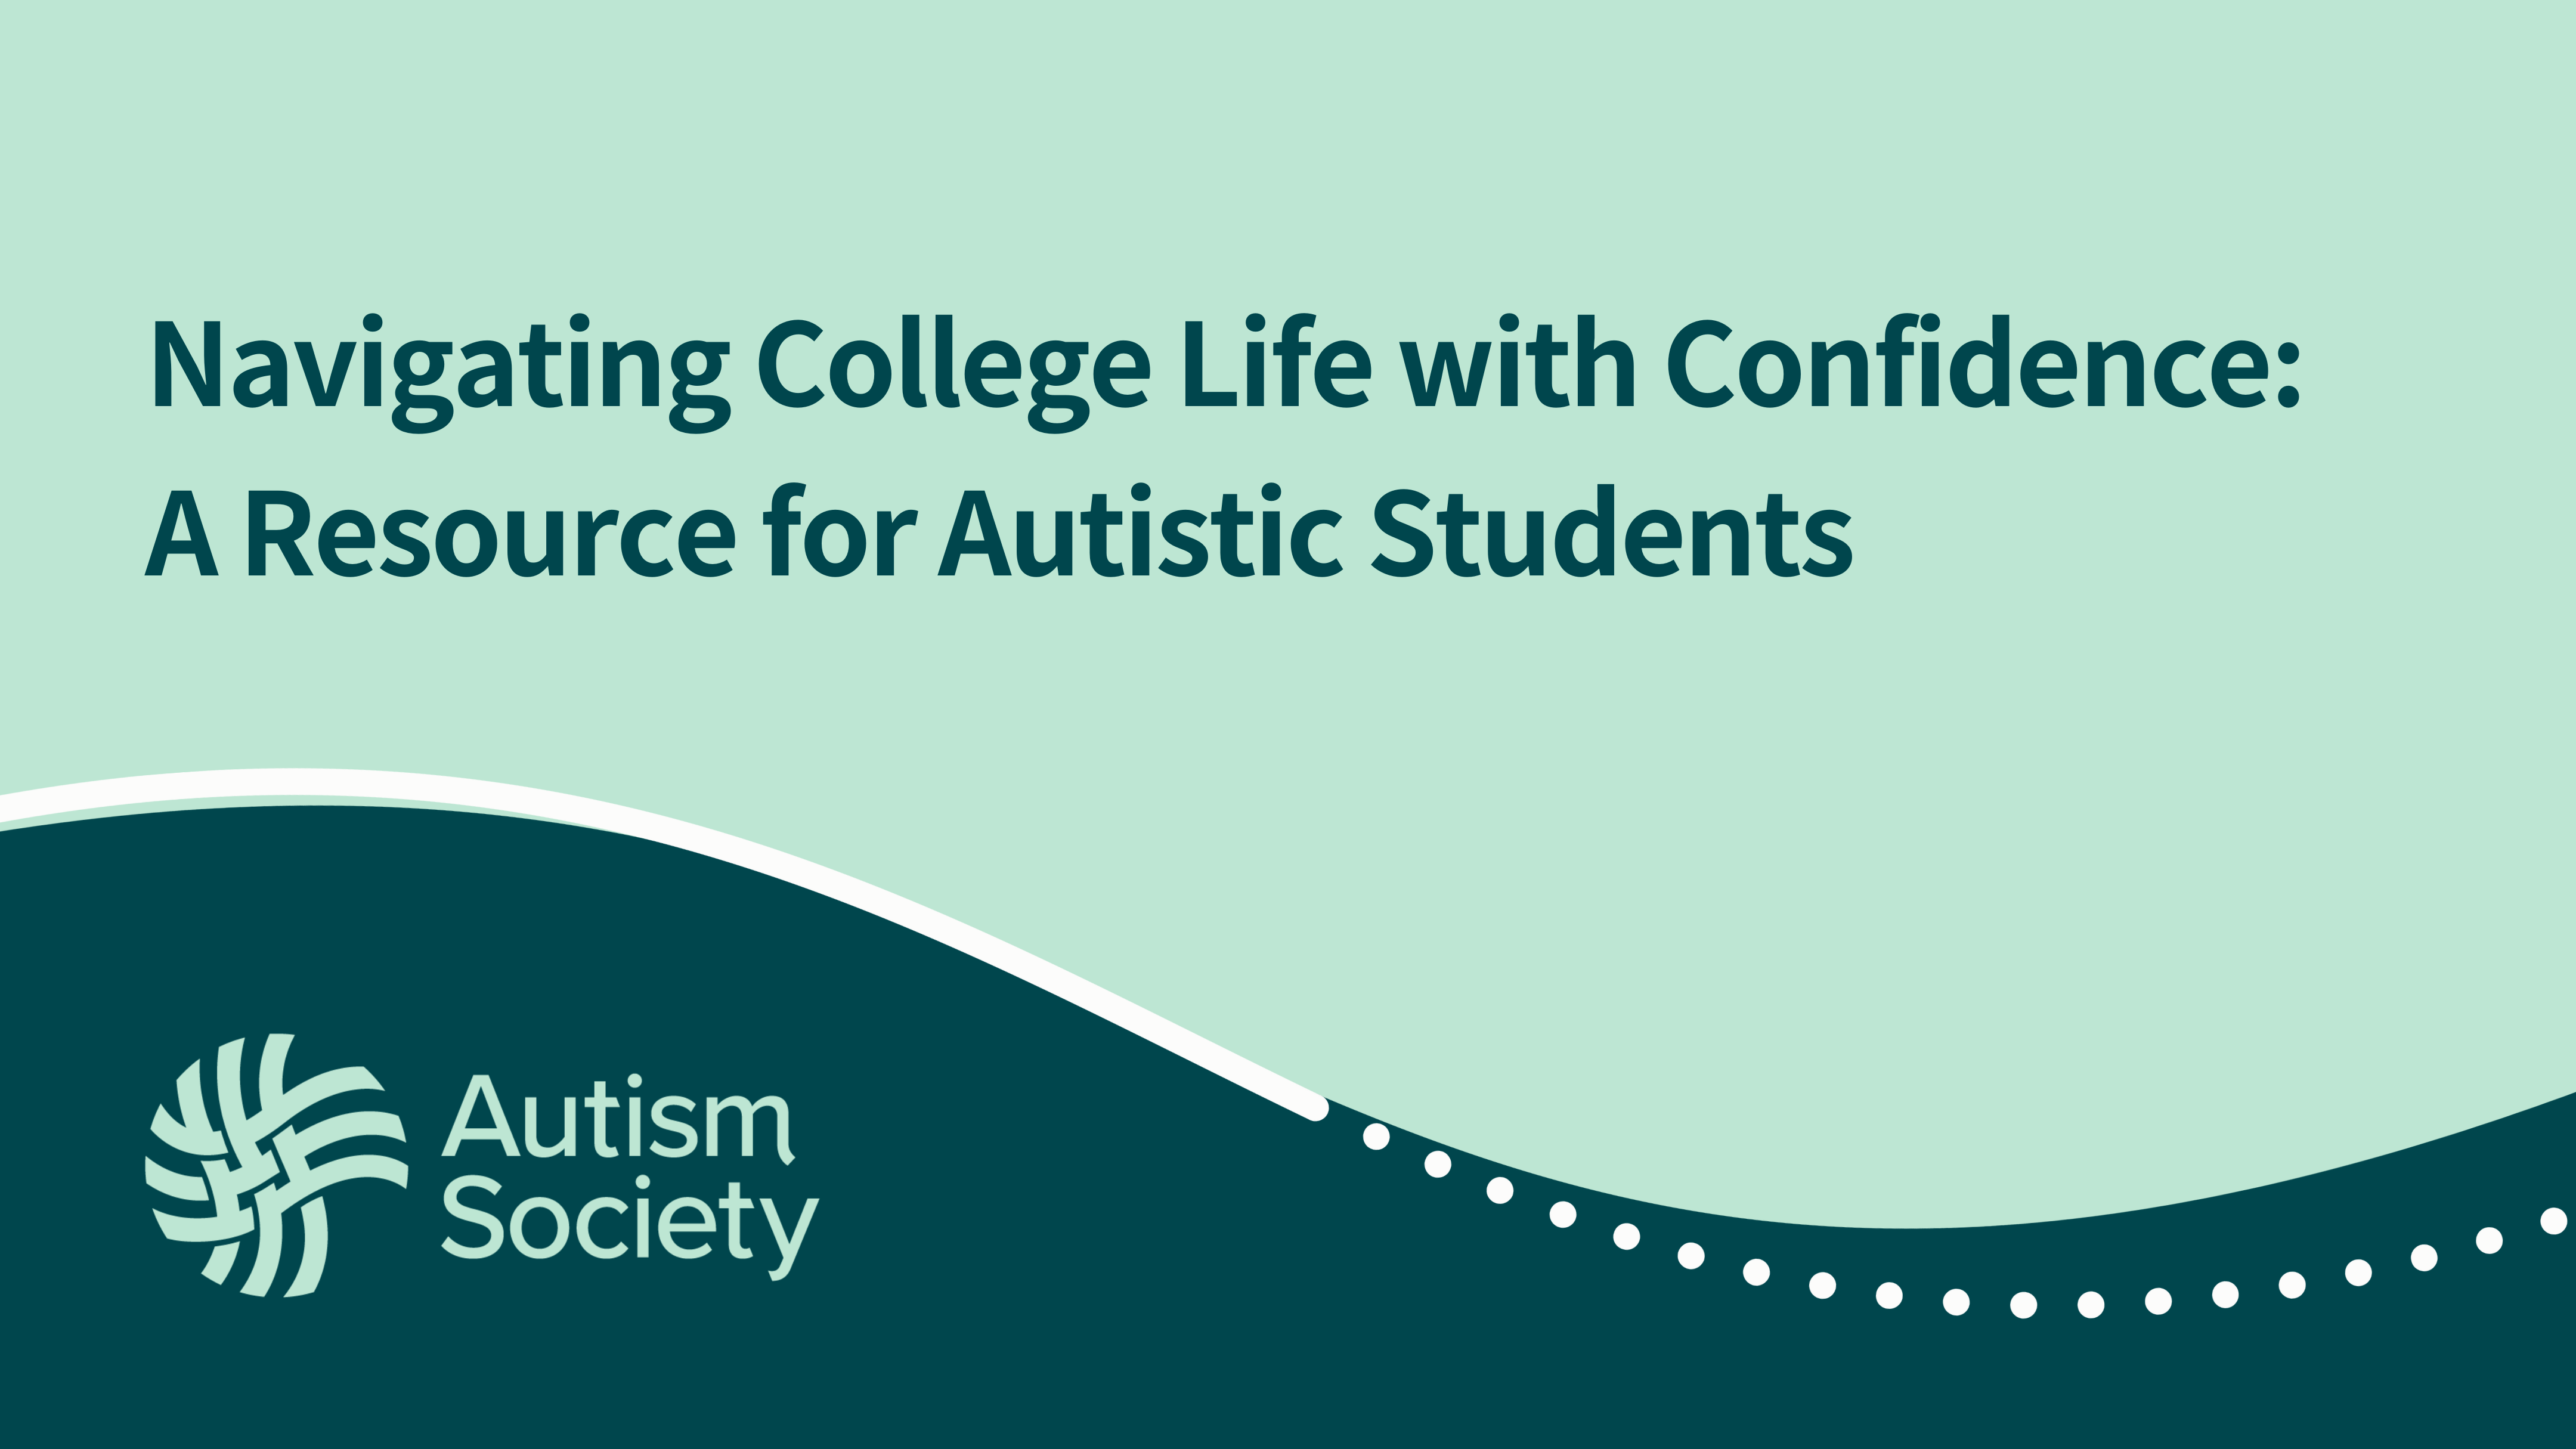 Navigating College Life with Confidence: A Resource for Autistic Students